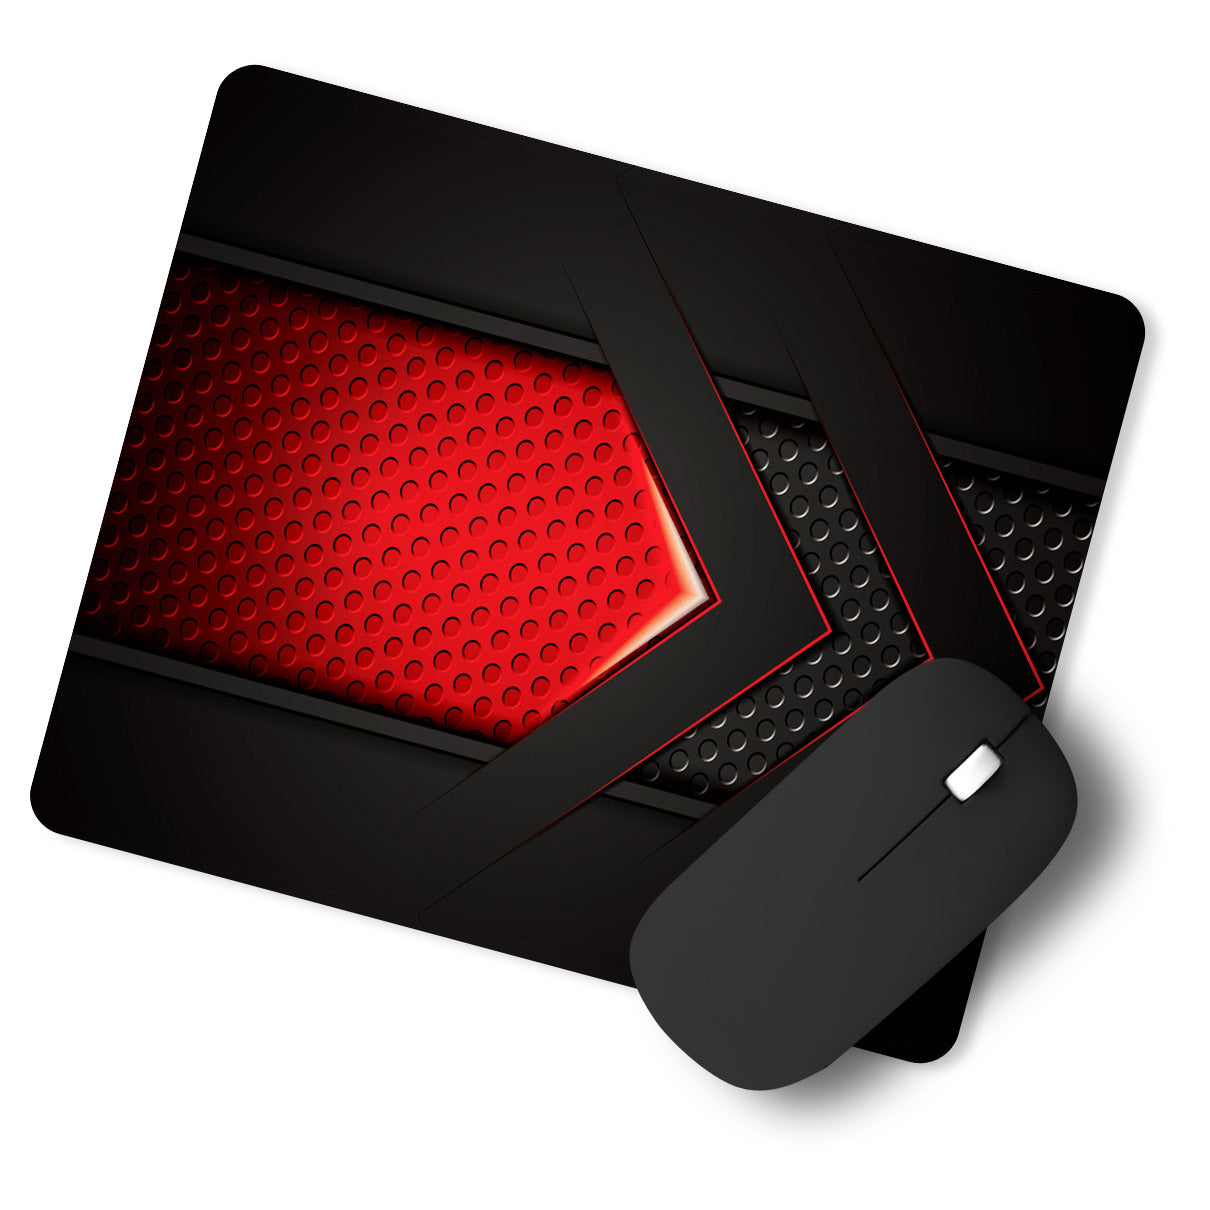 3d Black Red Game Background Designer Printed Premium Mouse pad (9 in x 7.5 in)